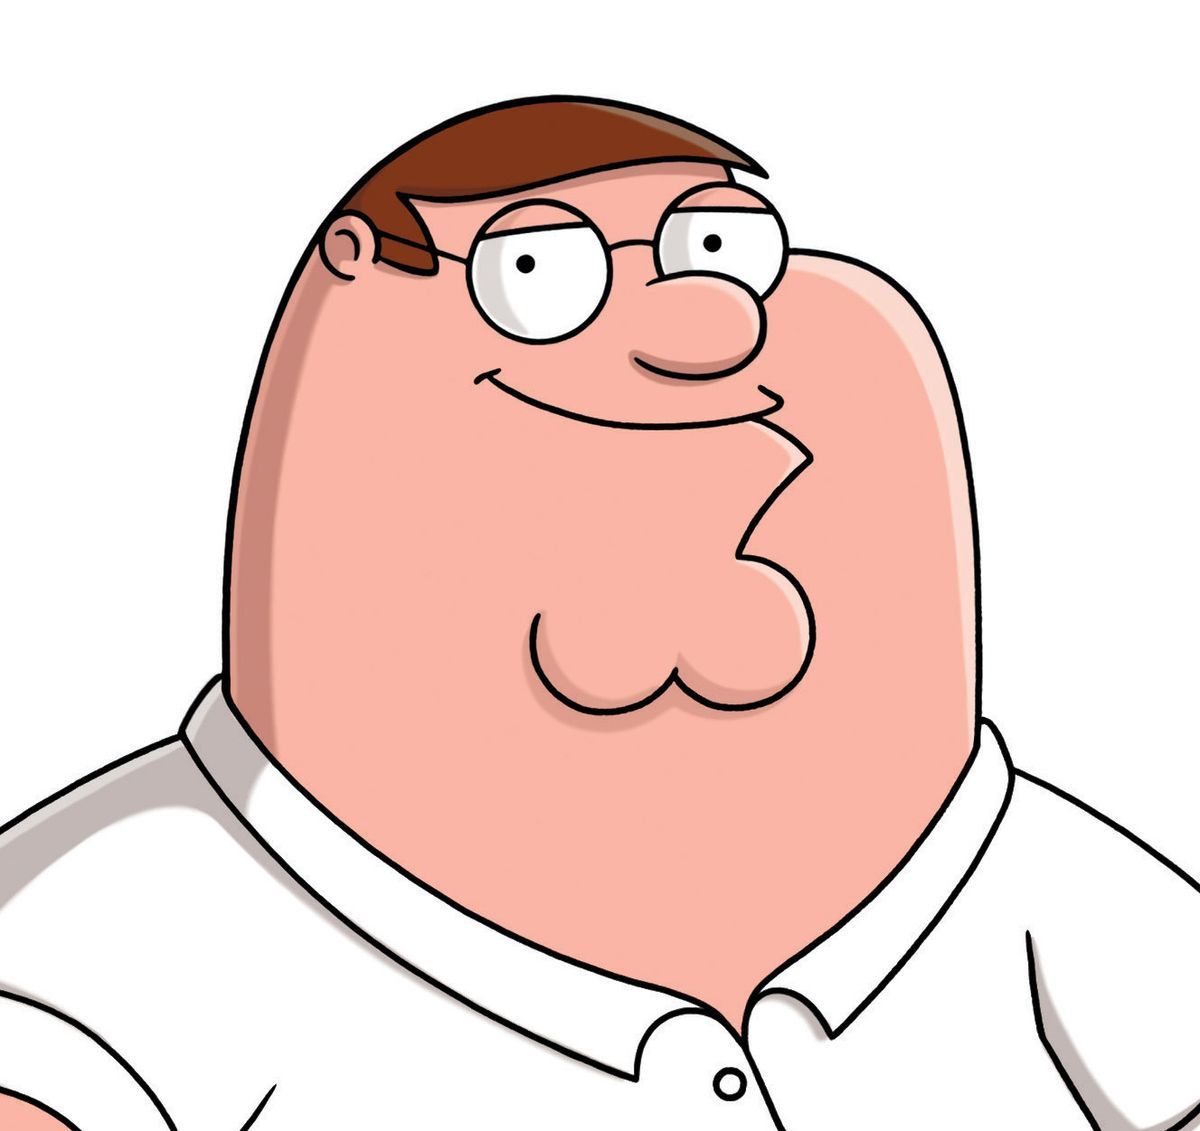 CALLING ALL PETER GRIFFIN PFPs - Chess Forums - Chess.com